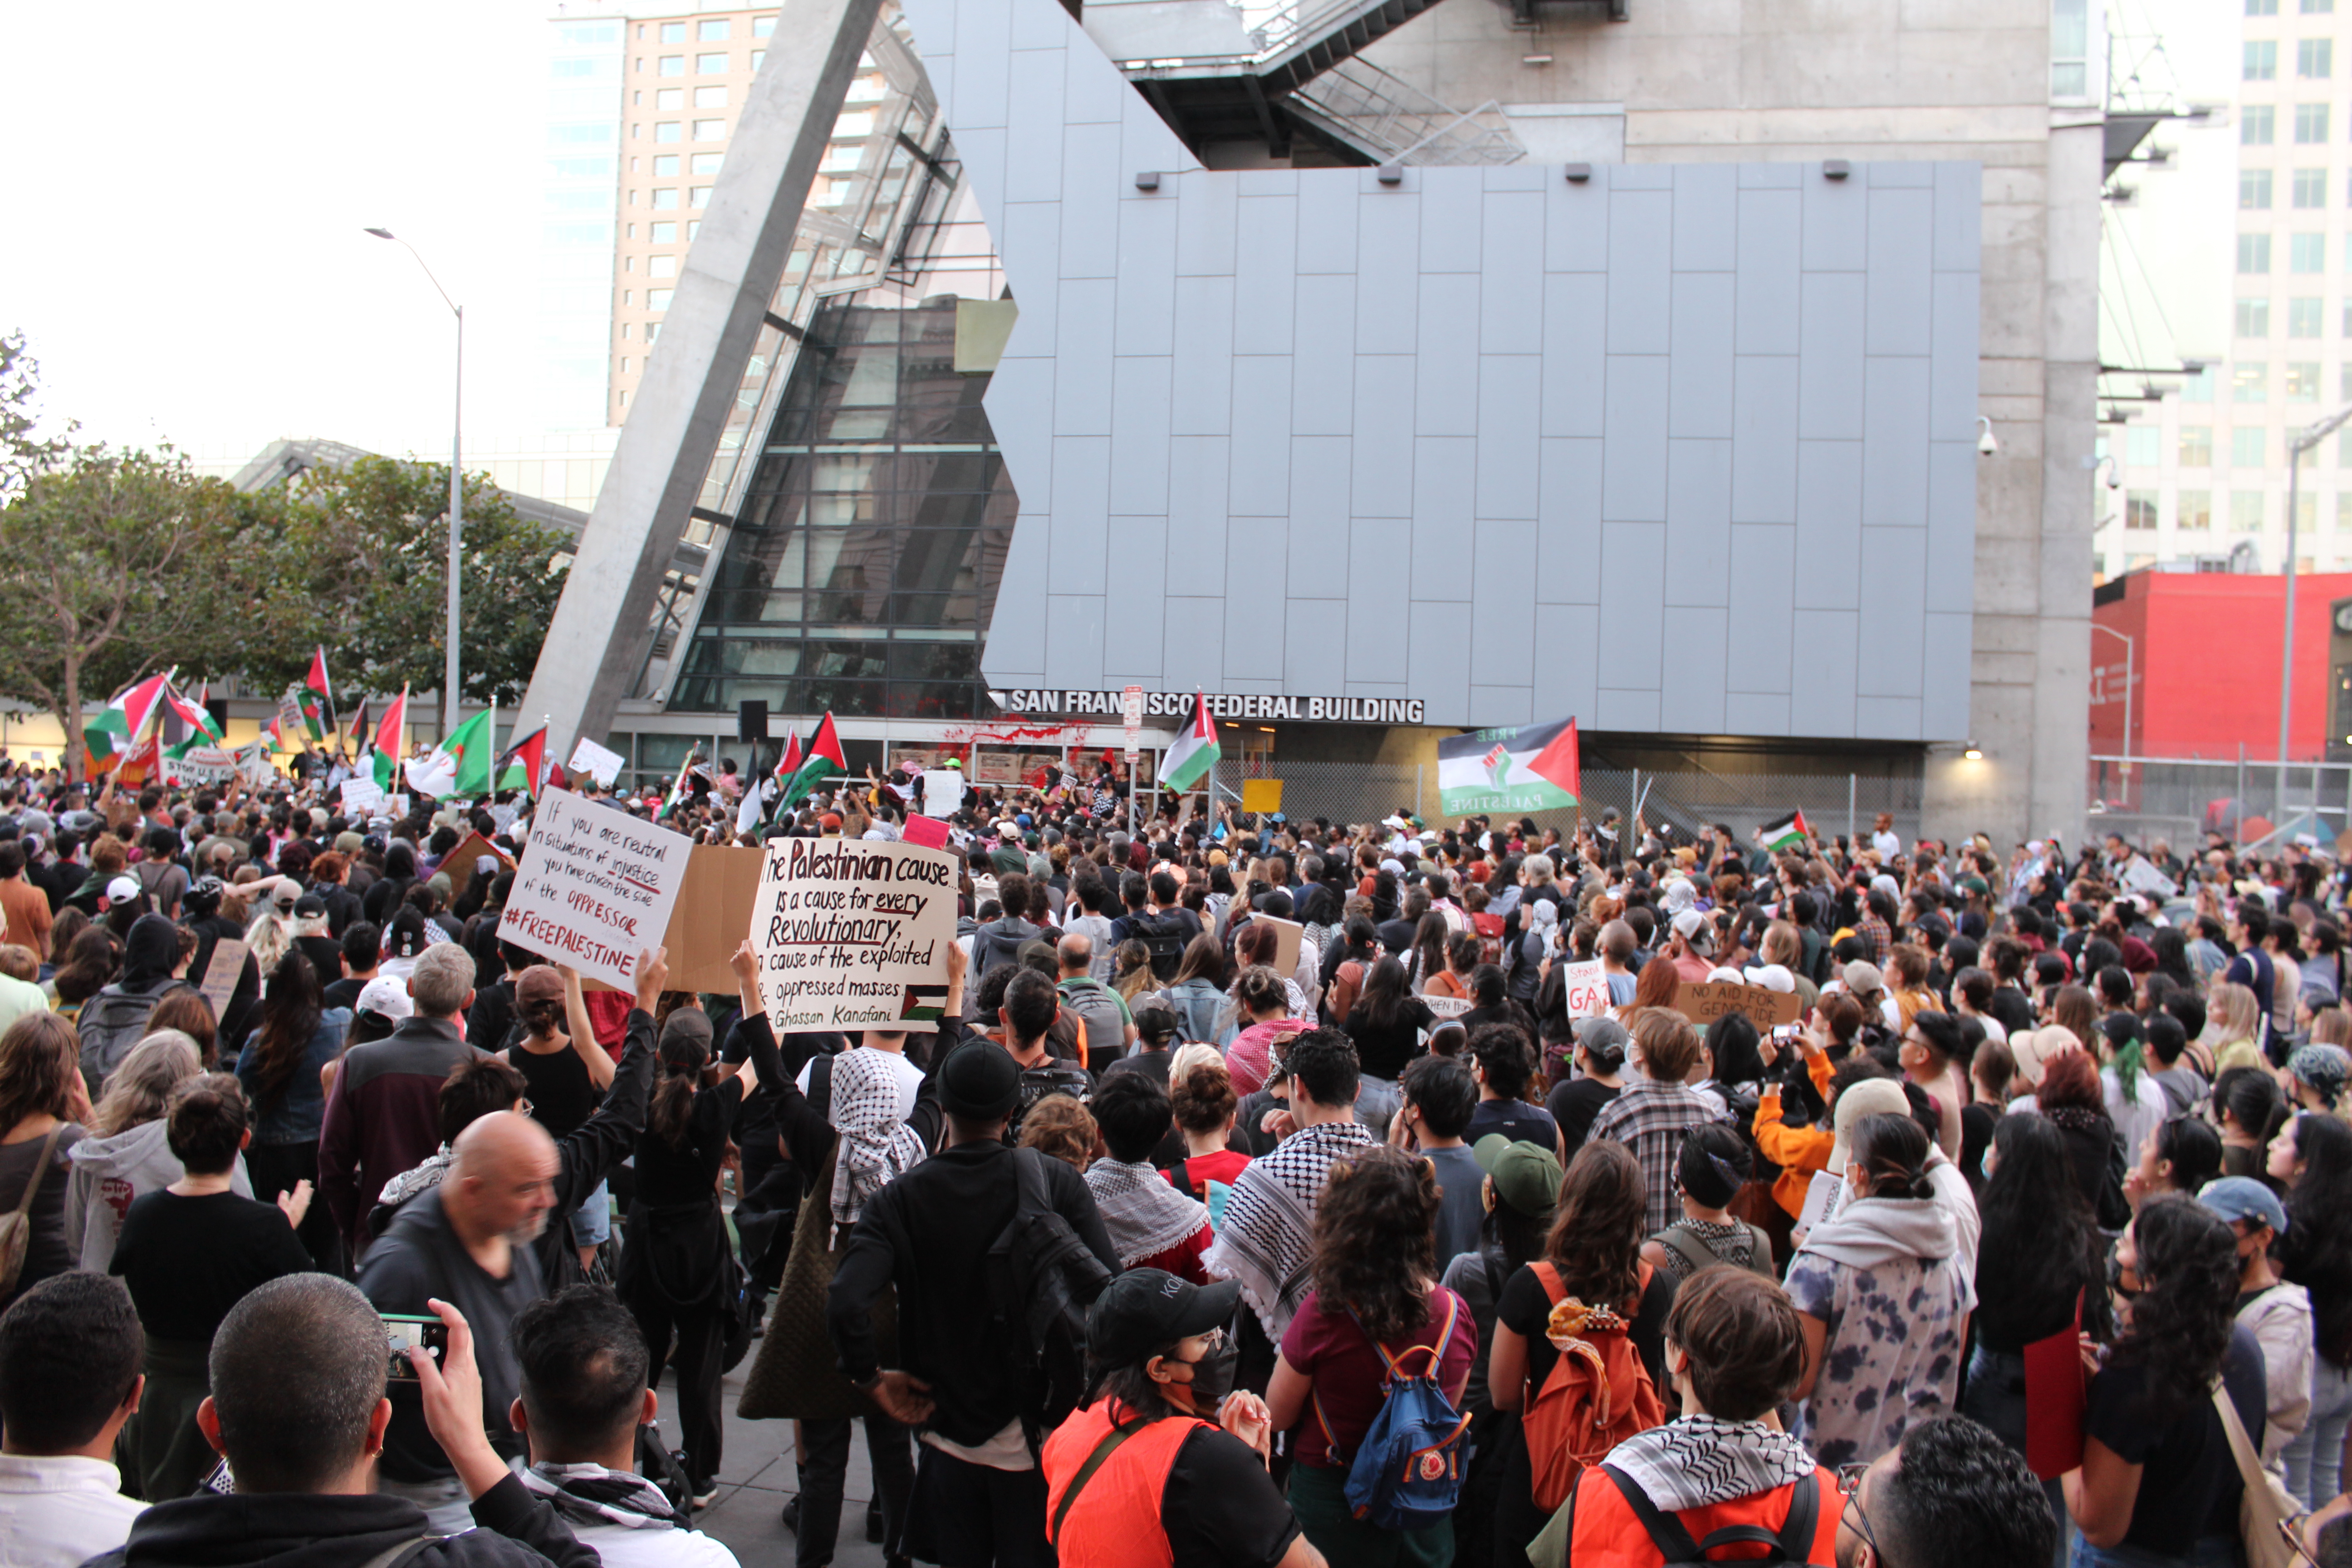 Thousands of people flood the street in front of the San Francisco Federal Building, demanding an end to the carnage in the Gaza Strip, on the evening of Thursday, Oct. 20. (Sonia Waraich - East Bay Echo)